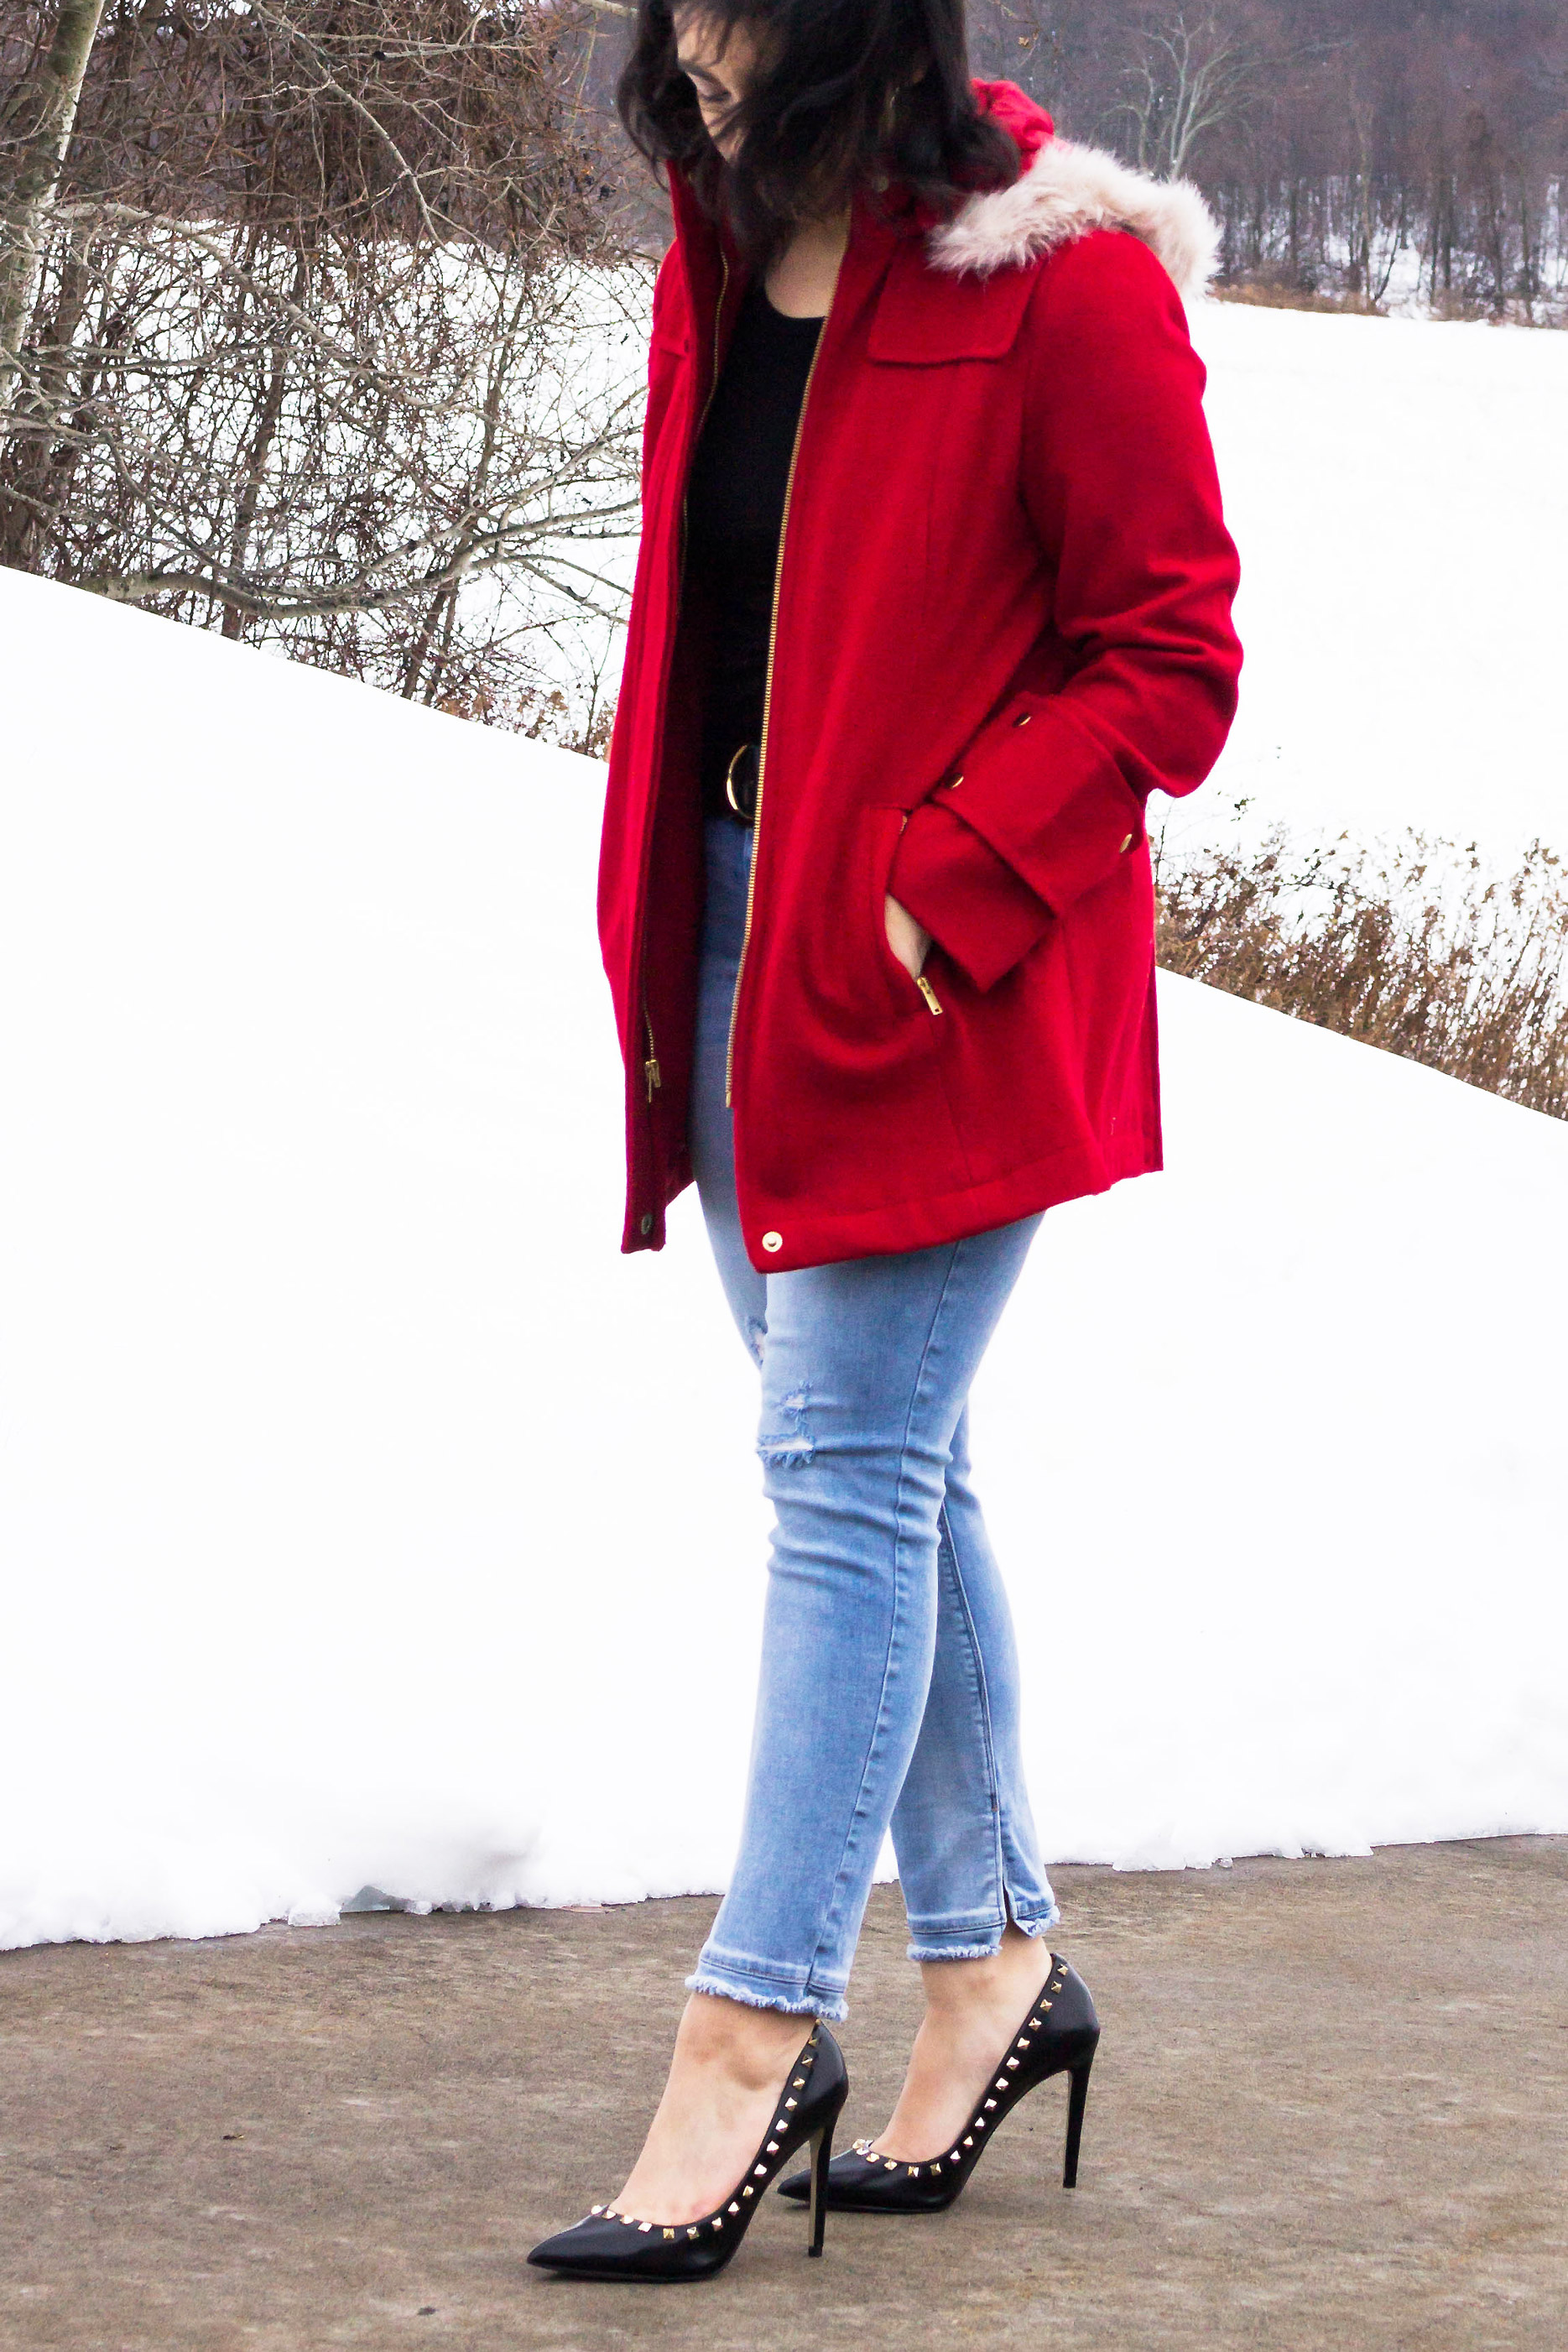 The Look For Less: J Crew Chateau Parka